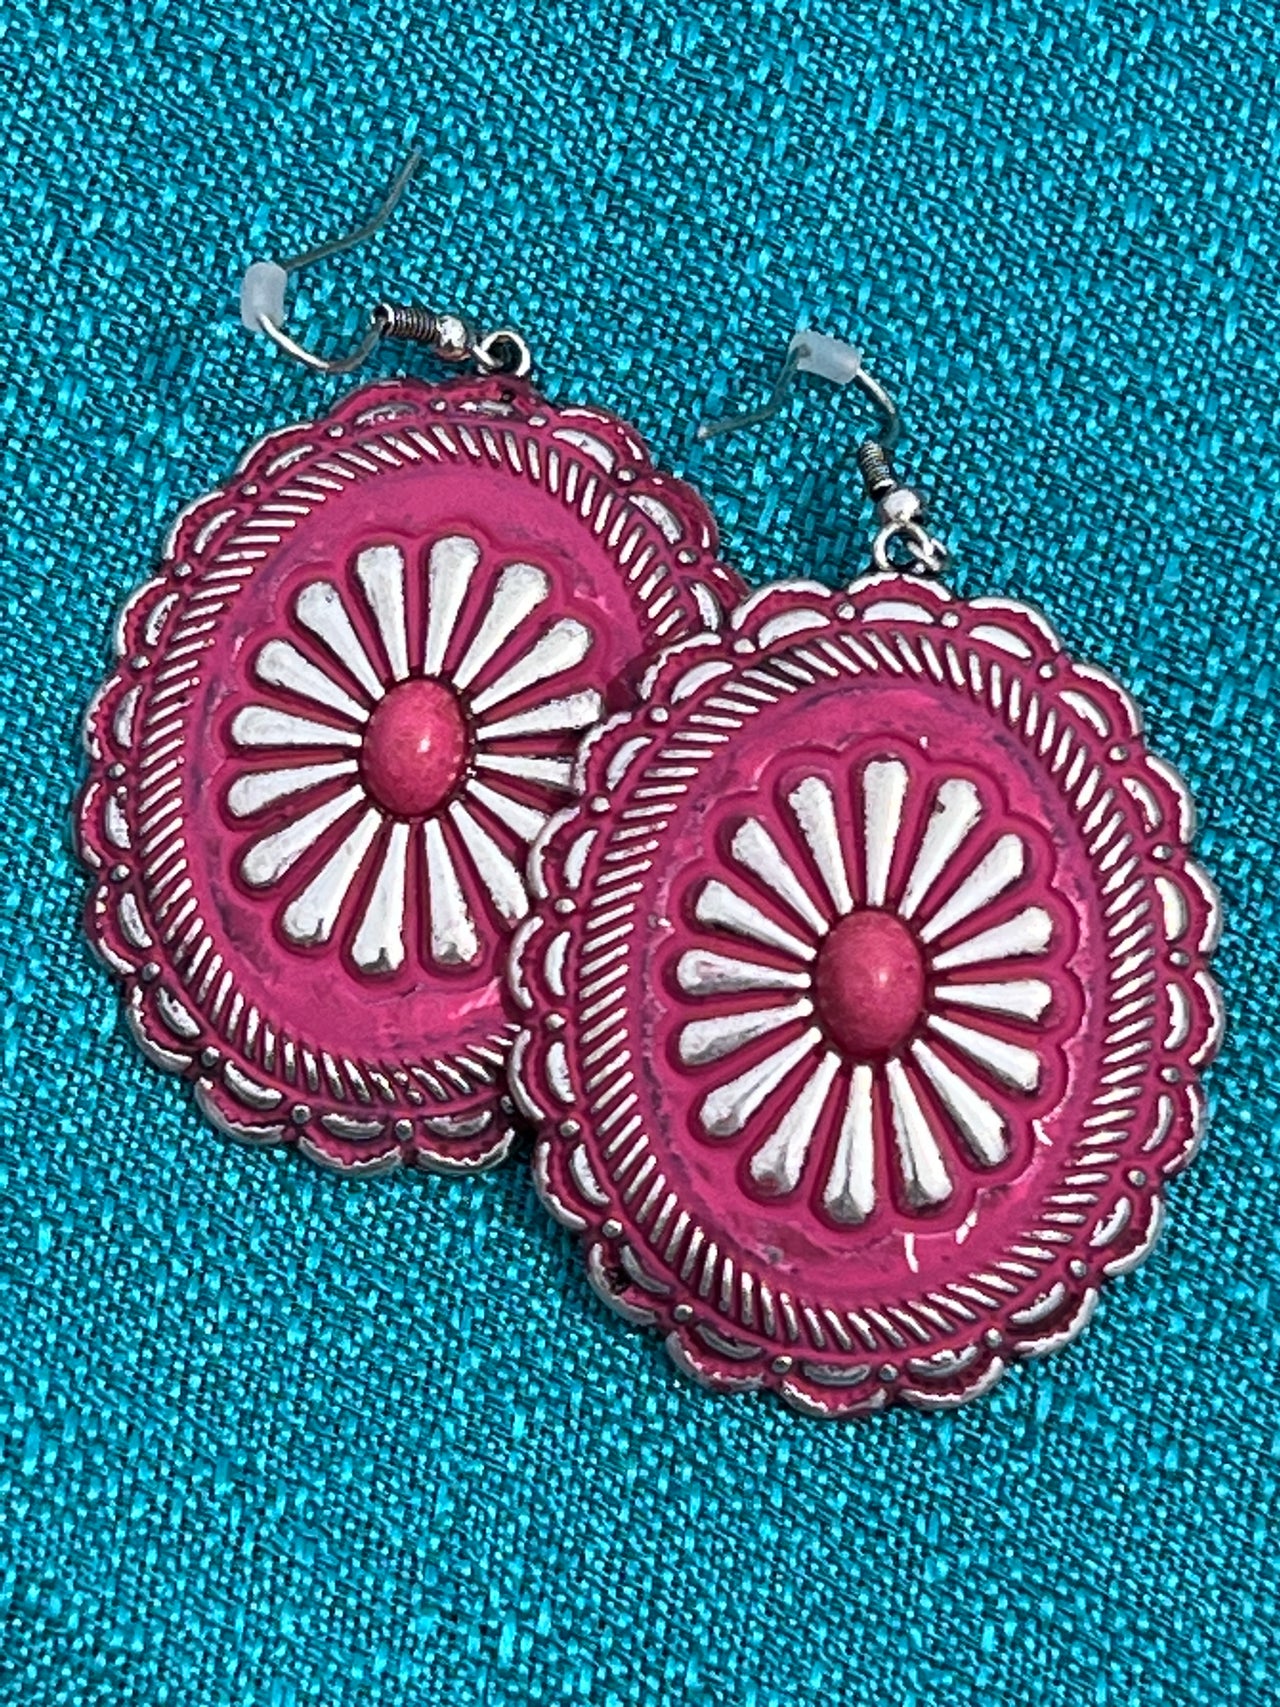 Vintage Washed Concho Earrings